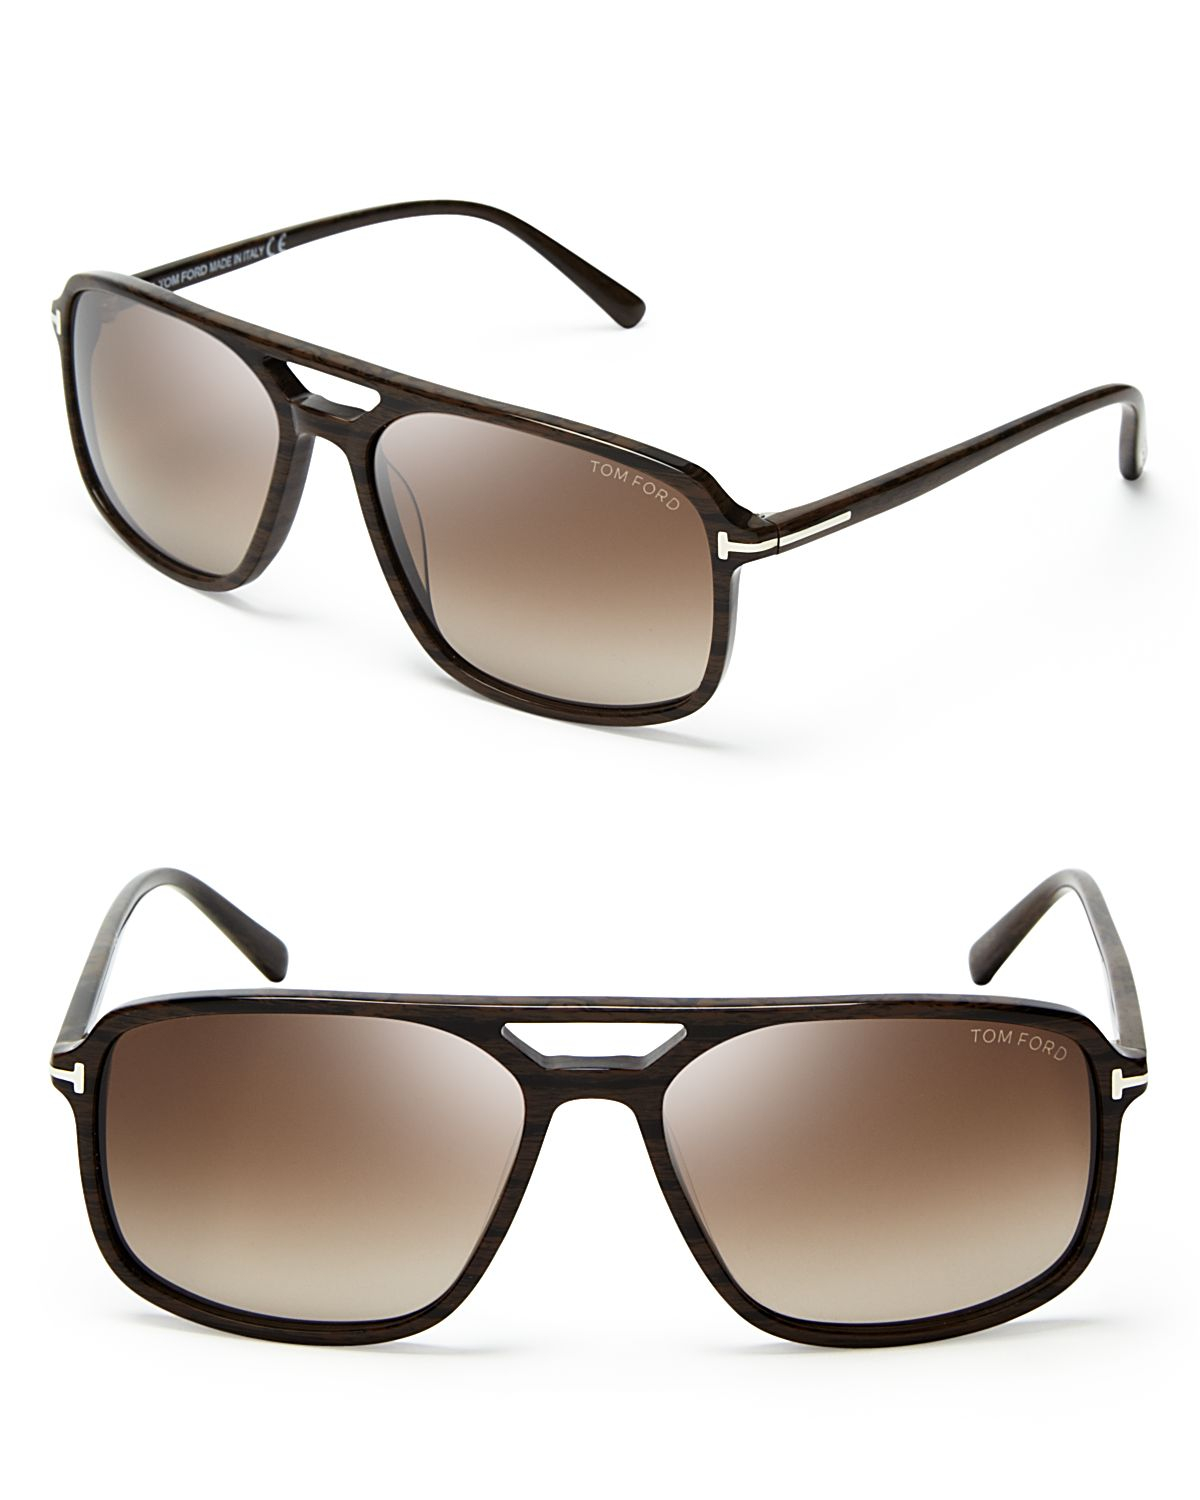 Tom Ford Terry Navigator Sunglasses in Brown for Men - Lyst